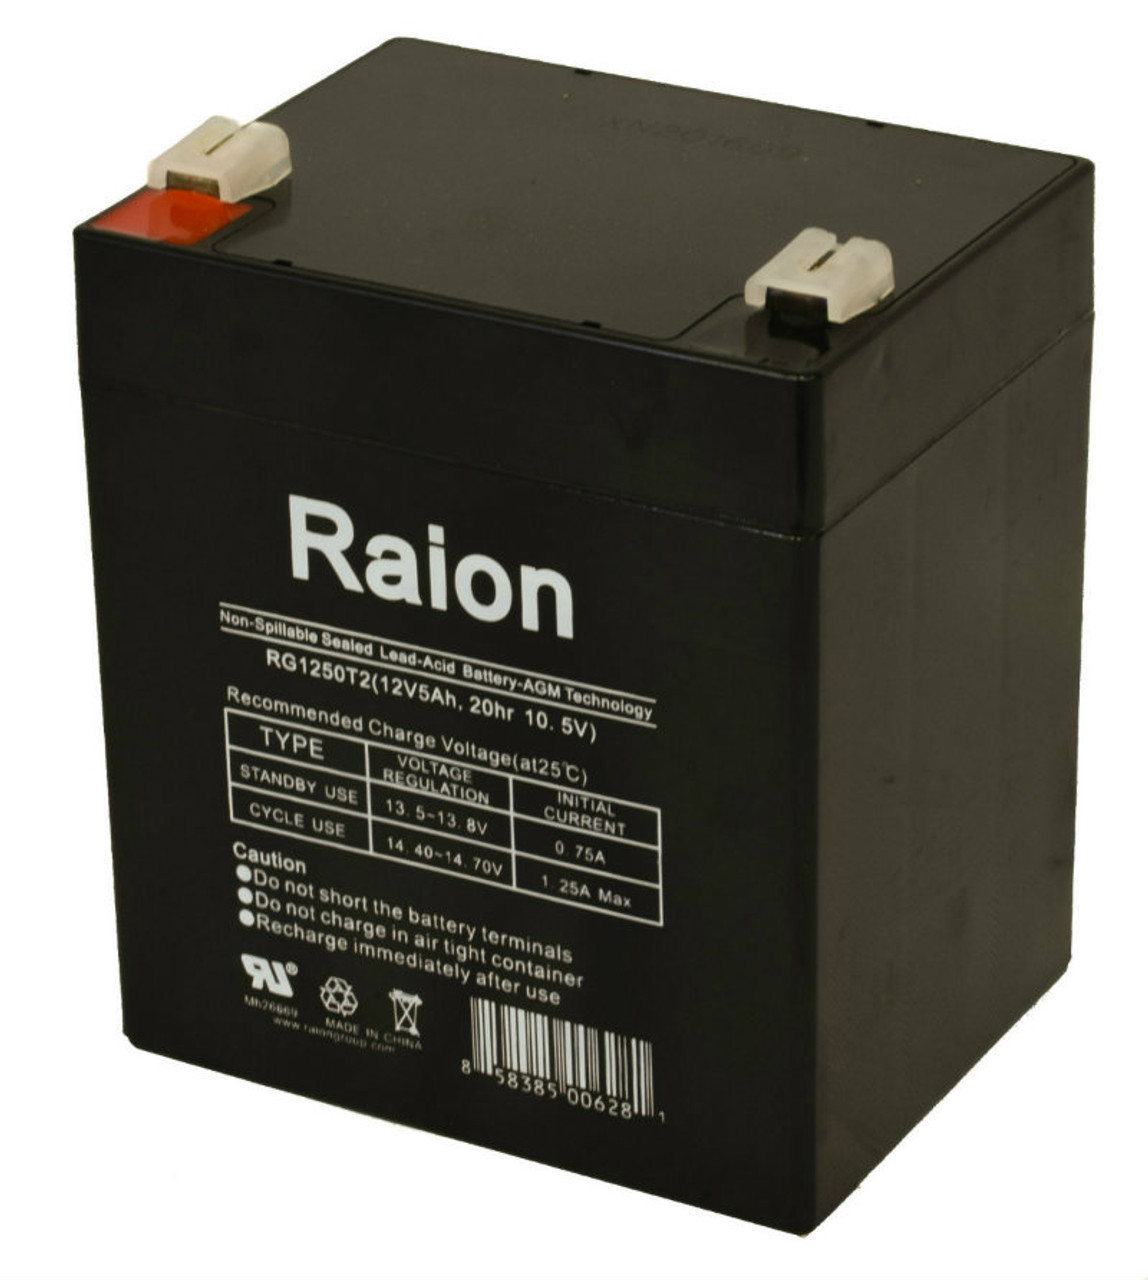 Raion Power RG1250T1 Replacement Battery for Zonne Energy FP1250